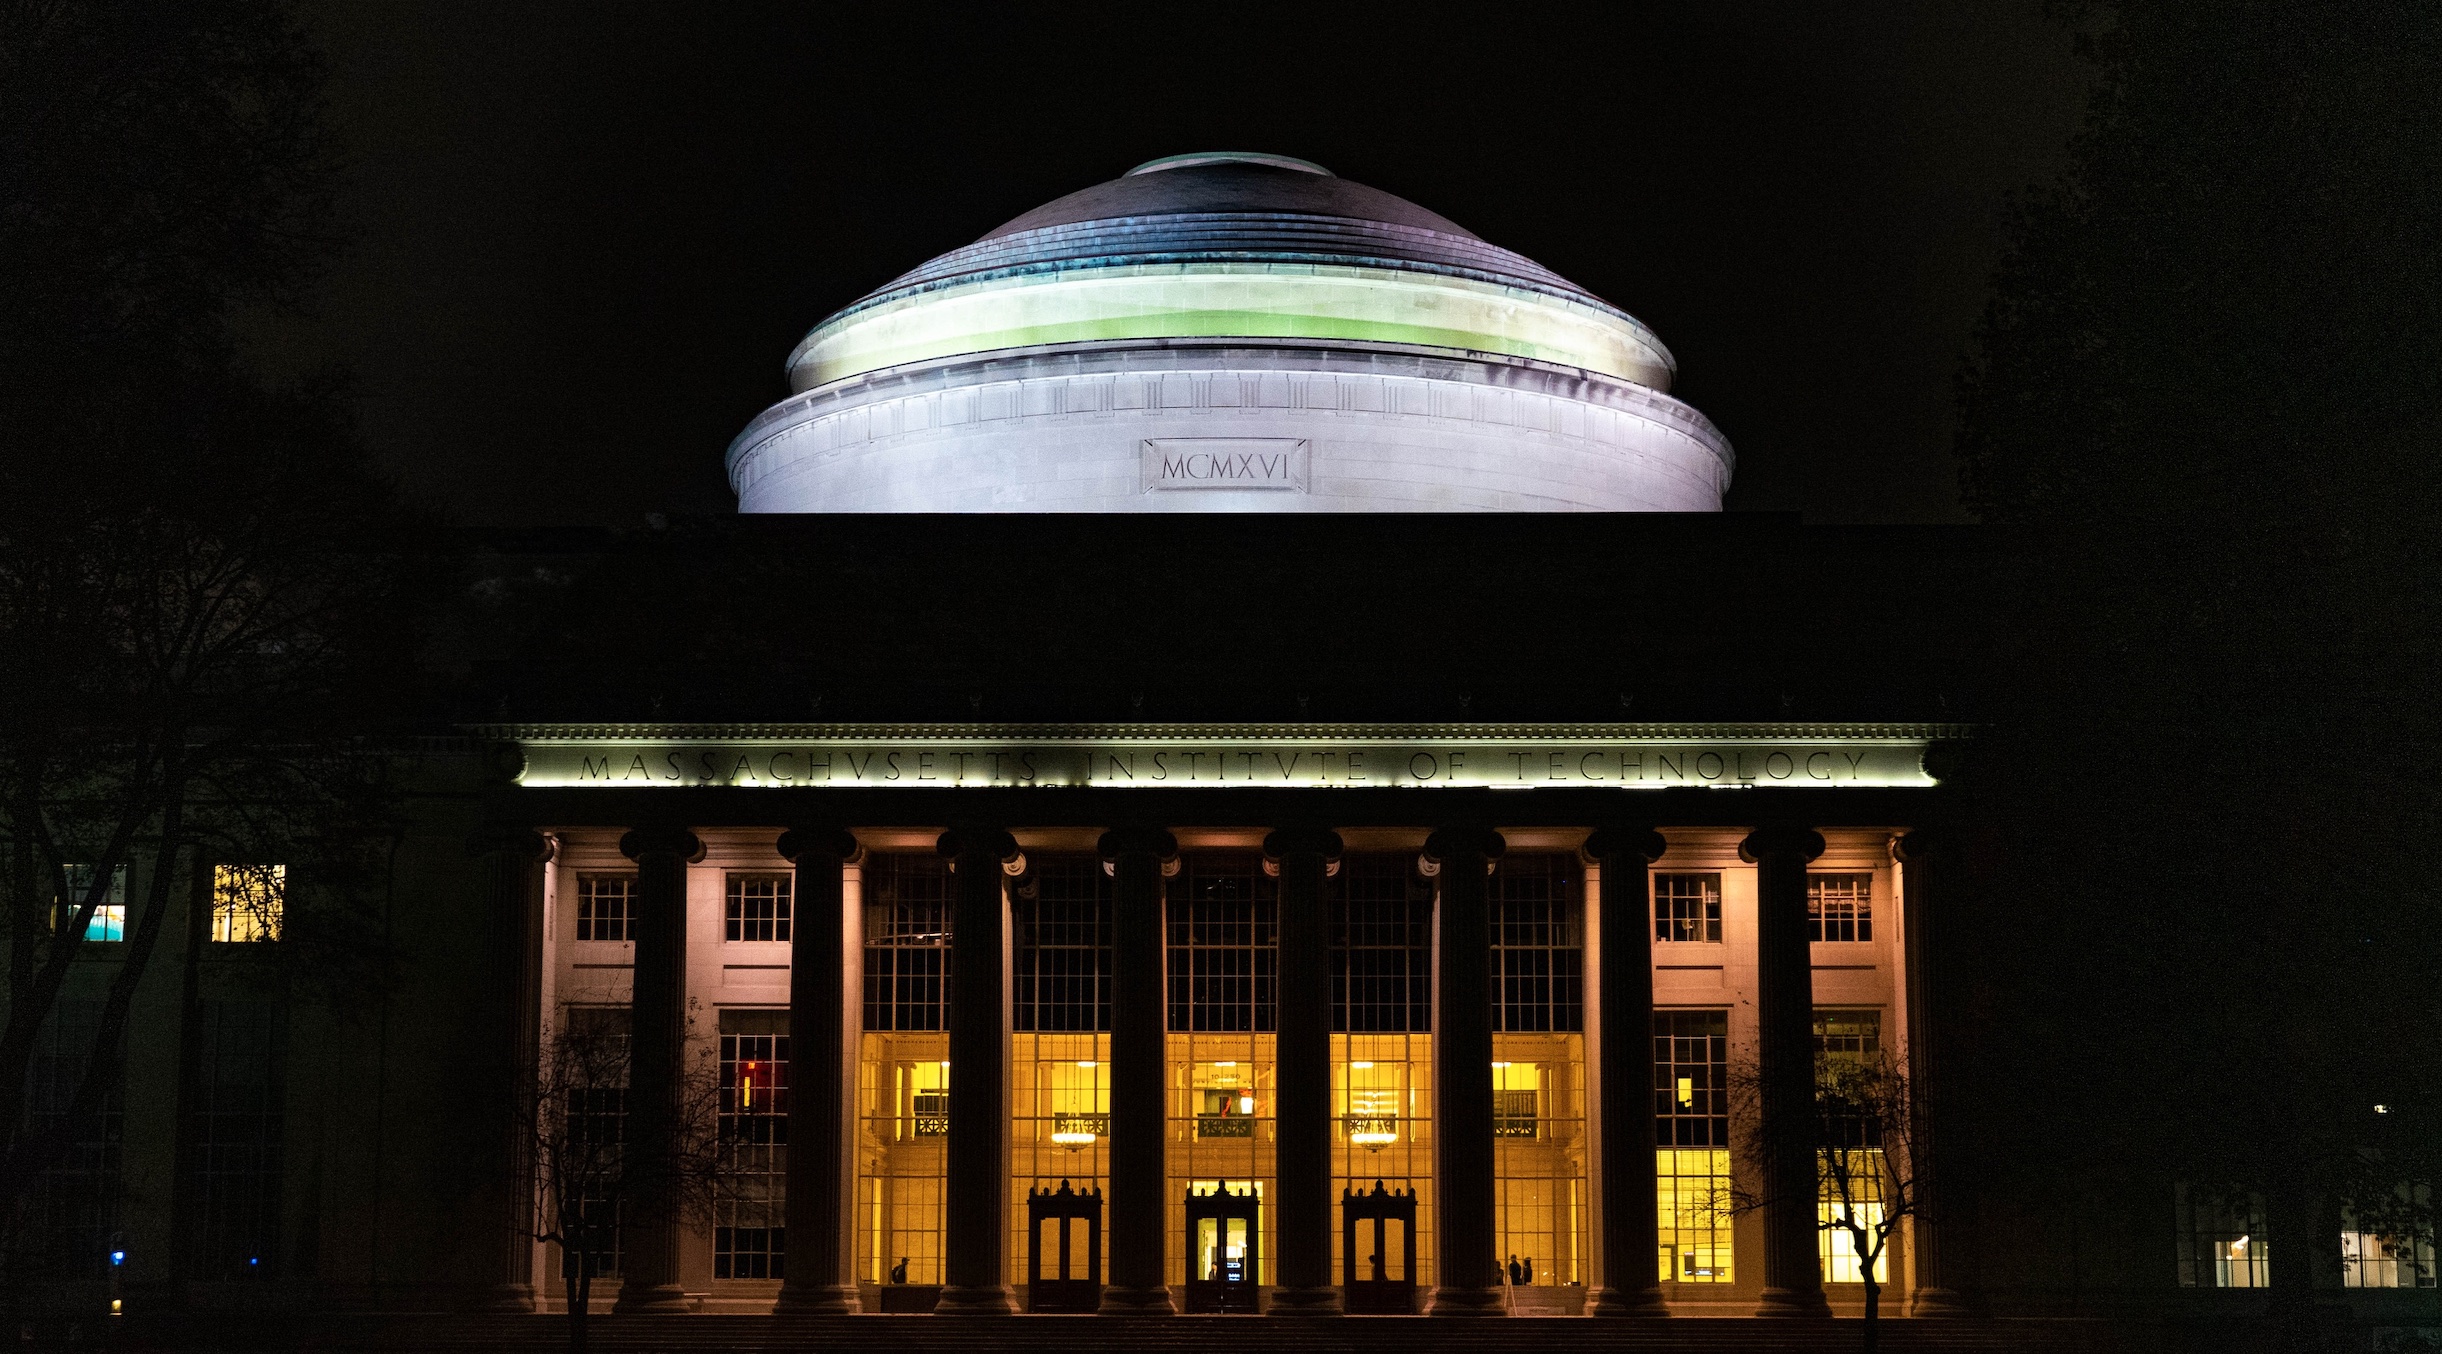 The Great Dome of MIT at night; image by Yuhan Du, via Unsplash.com.